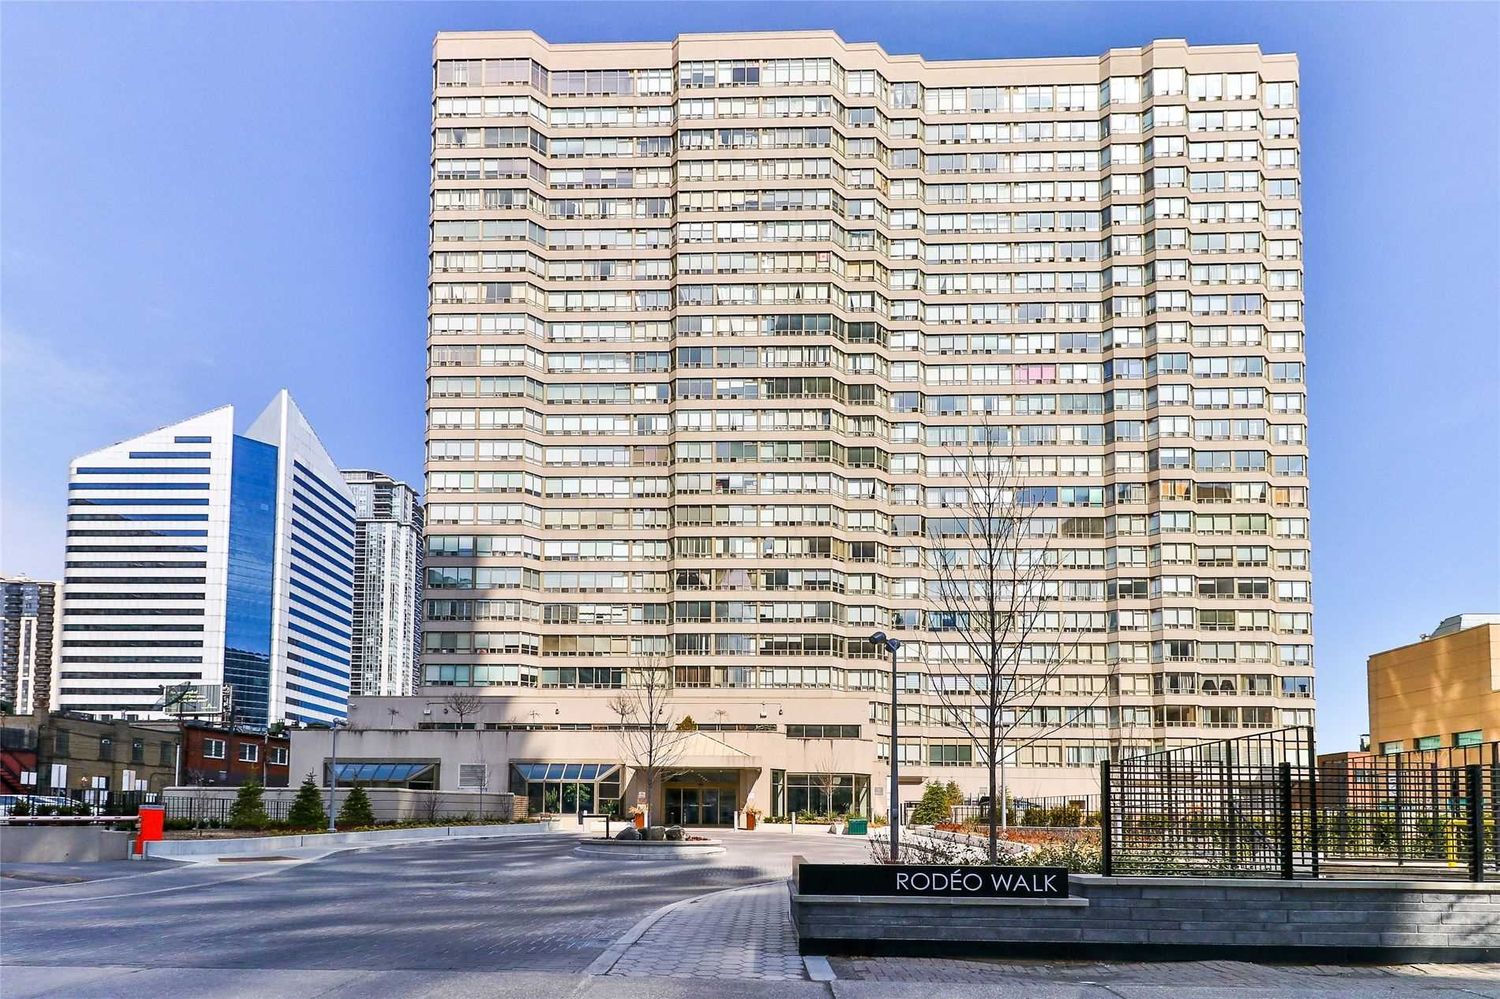 30 Greenfield Avenue. Rodeo Walk Condos is located in  North York, Toronto - image #1 of 3